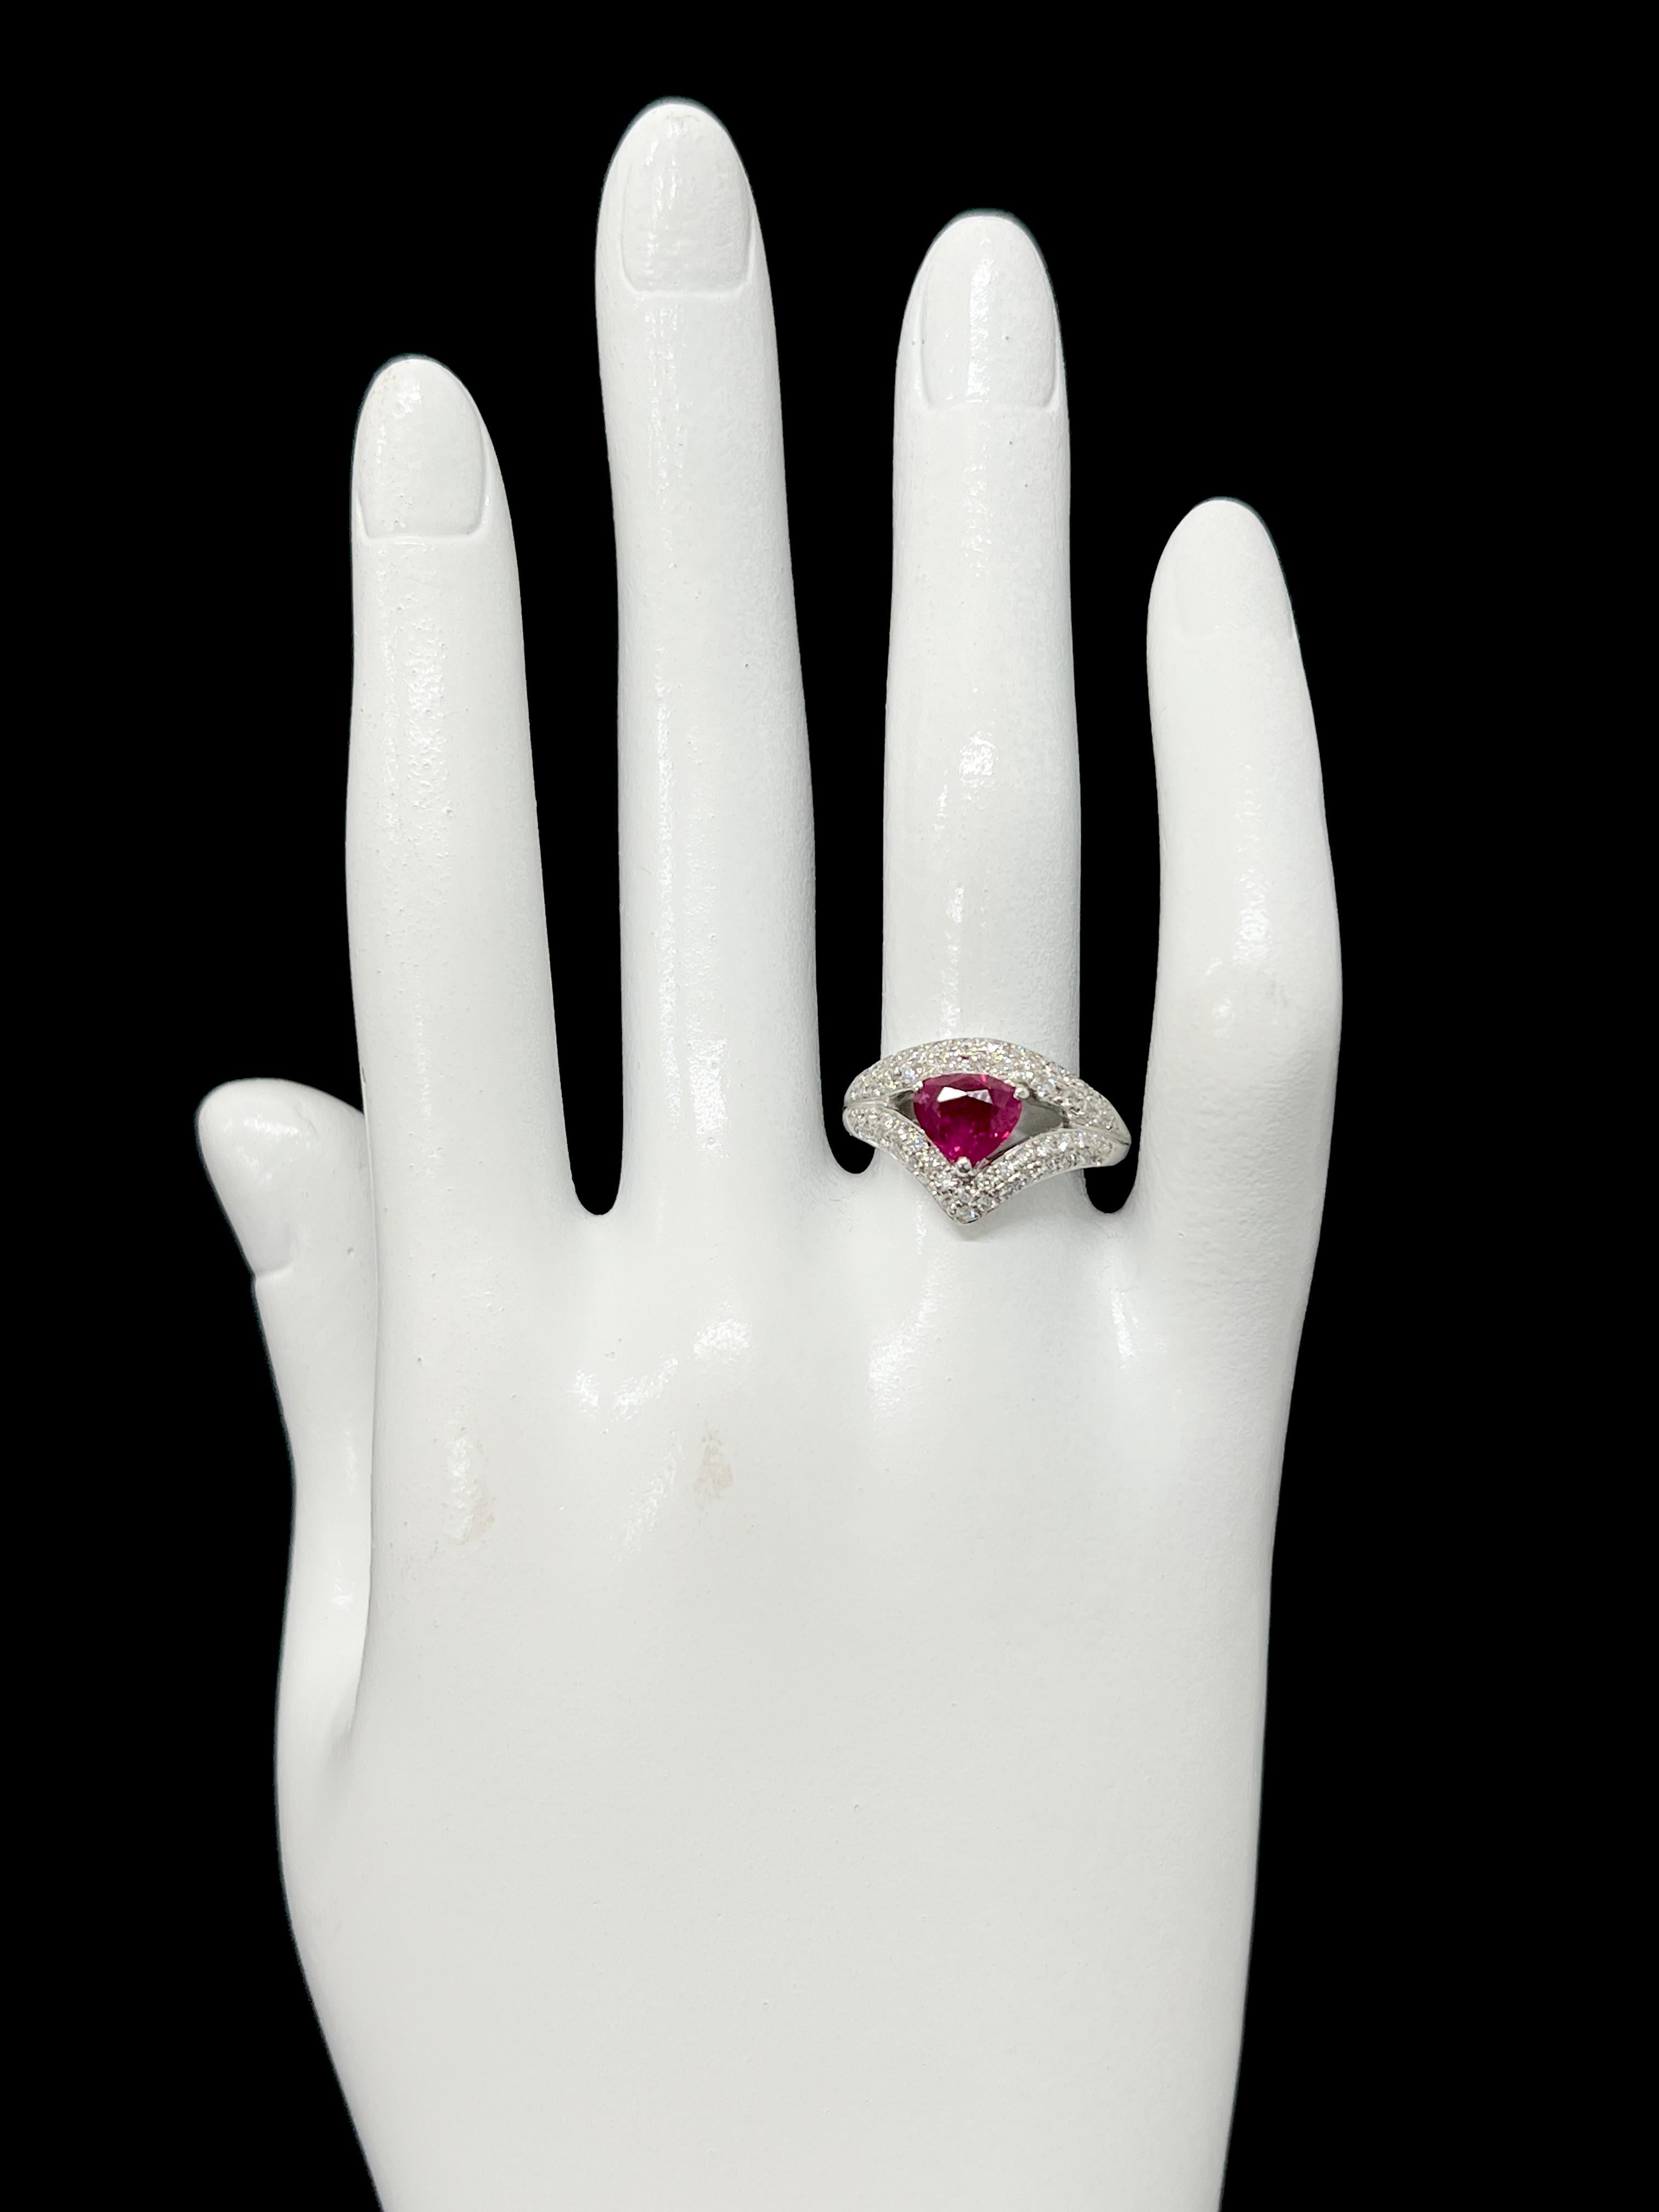 GIA Certified 1.49 Carat Natural Burmese Ruby and Diamond Ring set in Platinum For Sale 1